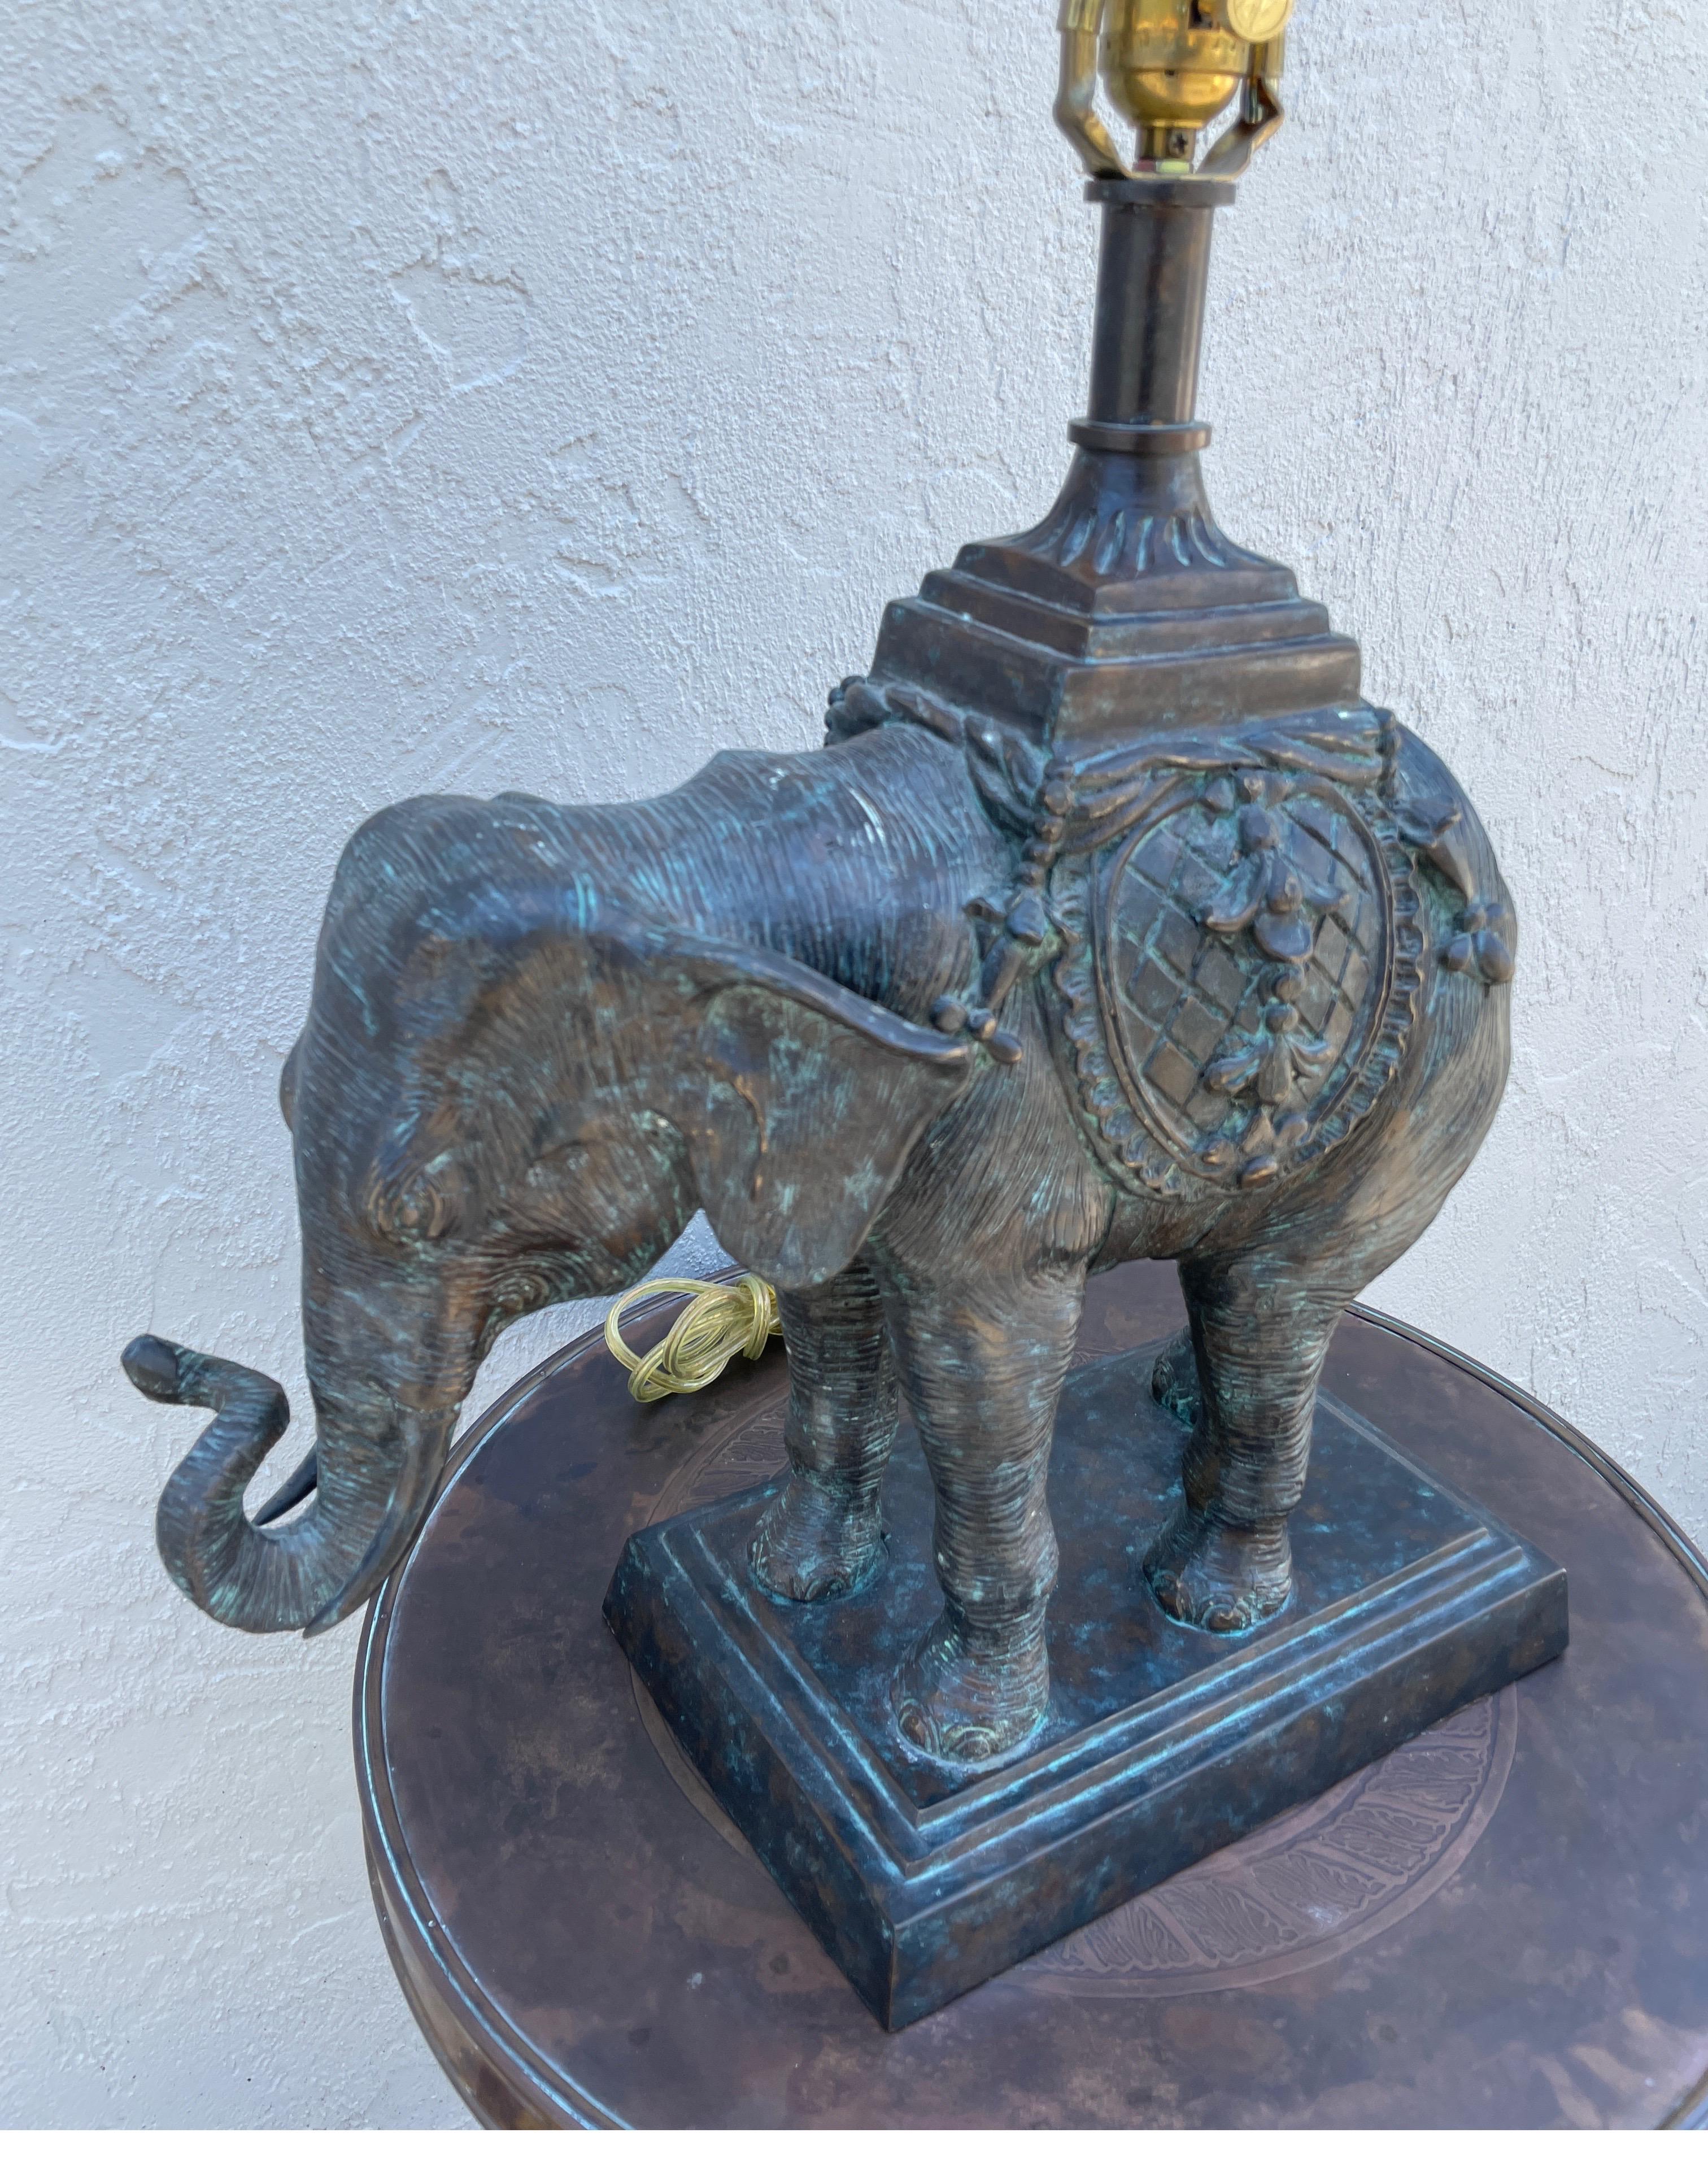 Large bronze elephant lamp with trunk up for good fortune.